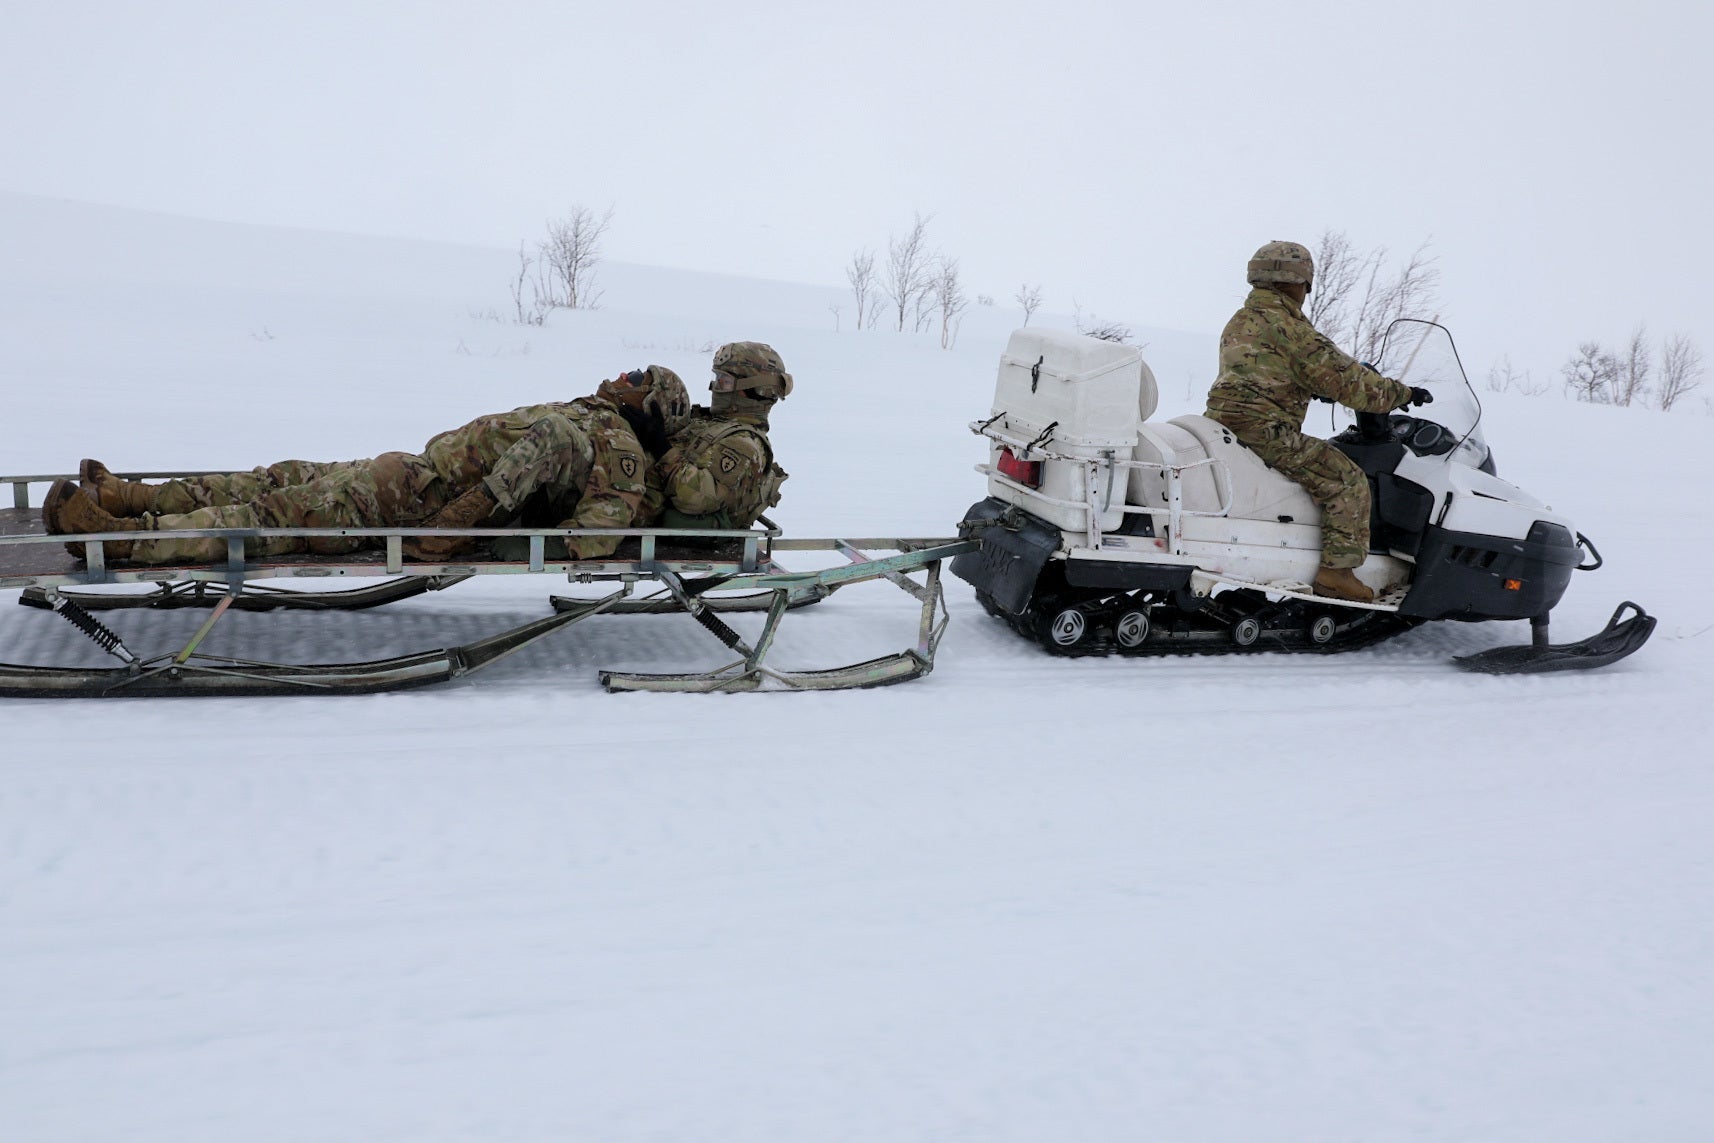 Paratroopers from the 4th Brigade Combat Team, 25th Infantry Division (Airborne) and their Norwegian and Spanish allies conducted casualty evaluation training during Exercise Swift Response 2022, May 7, 8 and 9, 2022, Lake Altevatnet, Norway.Casualty triage and evaluation training is essential in preparation for potential combat situations. Medical personnel had to deal with mock injuries in relation to paratroopers jumping into Arctic and Subarctic conditions.



Exercise Swift Response 2022 is an annual multinational training exercise, which takes place in Eastern Europe, the Arctic High North, Baltic and Balkans from May 2-20. The purpose of the exercise is to present combat credible Army forces in Europe and Africa, and enhance readiness by building airborne interoperability with Allies and Partners and the integration of joint service partnership. (U.S. Army photo by Spc. Kendall Lewis, 40th Public Affairs Detachment)